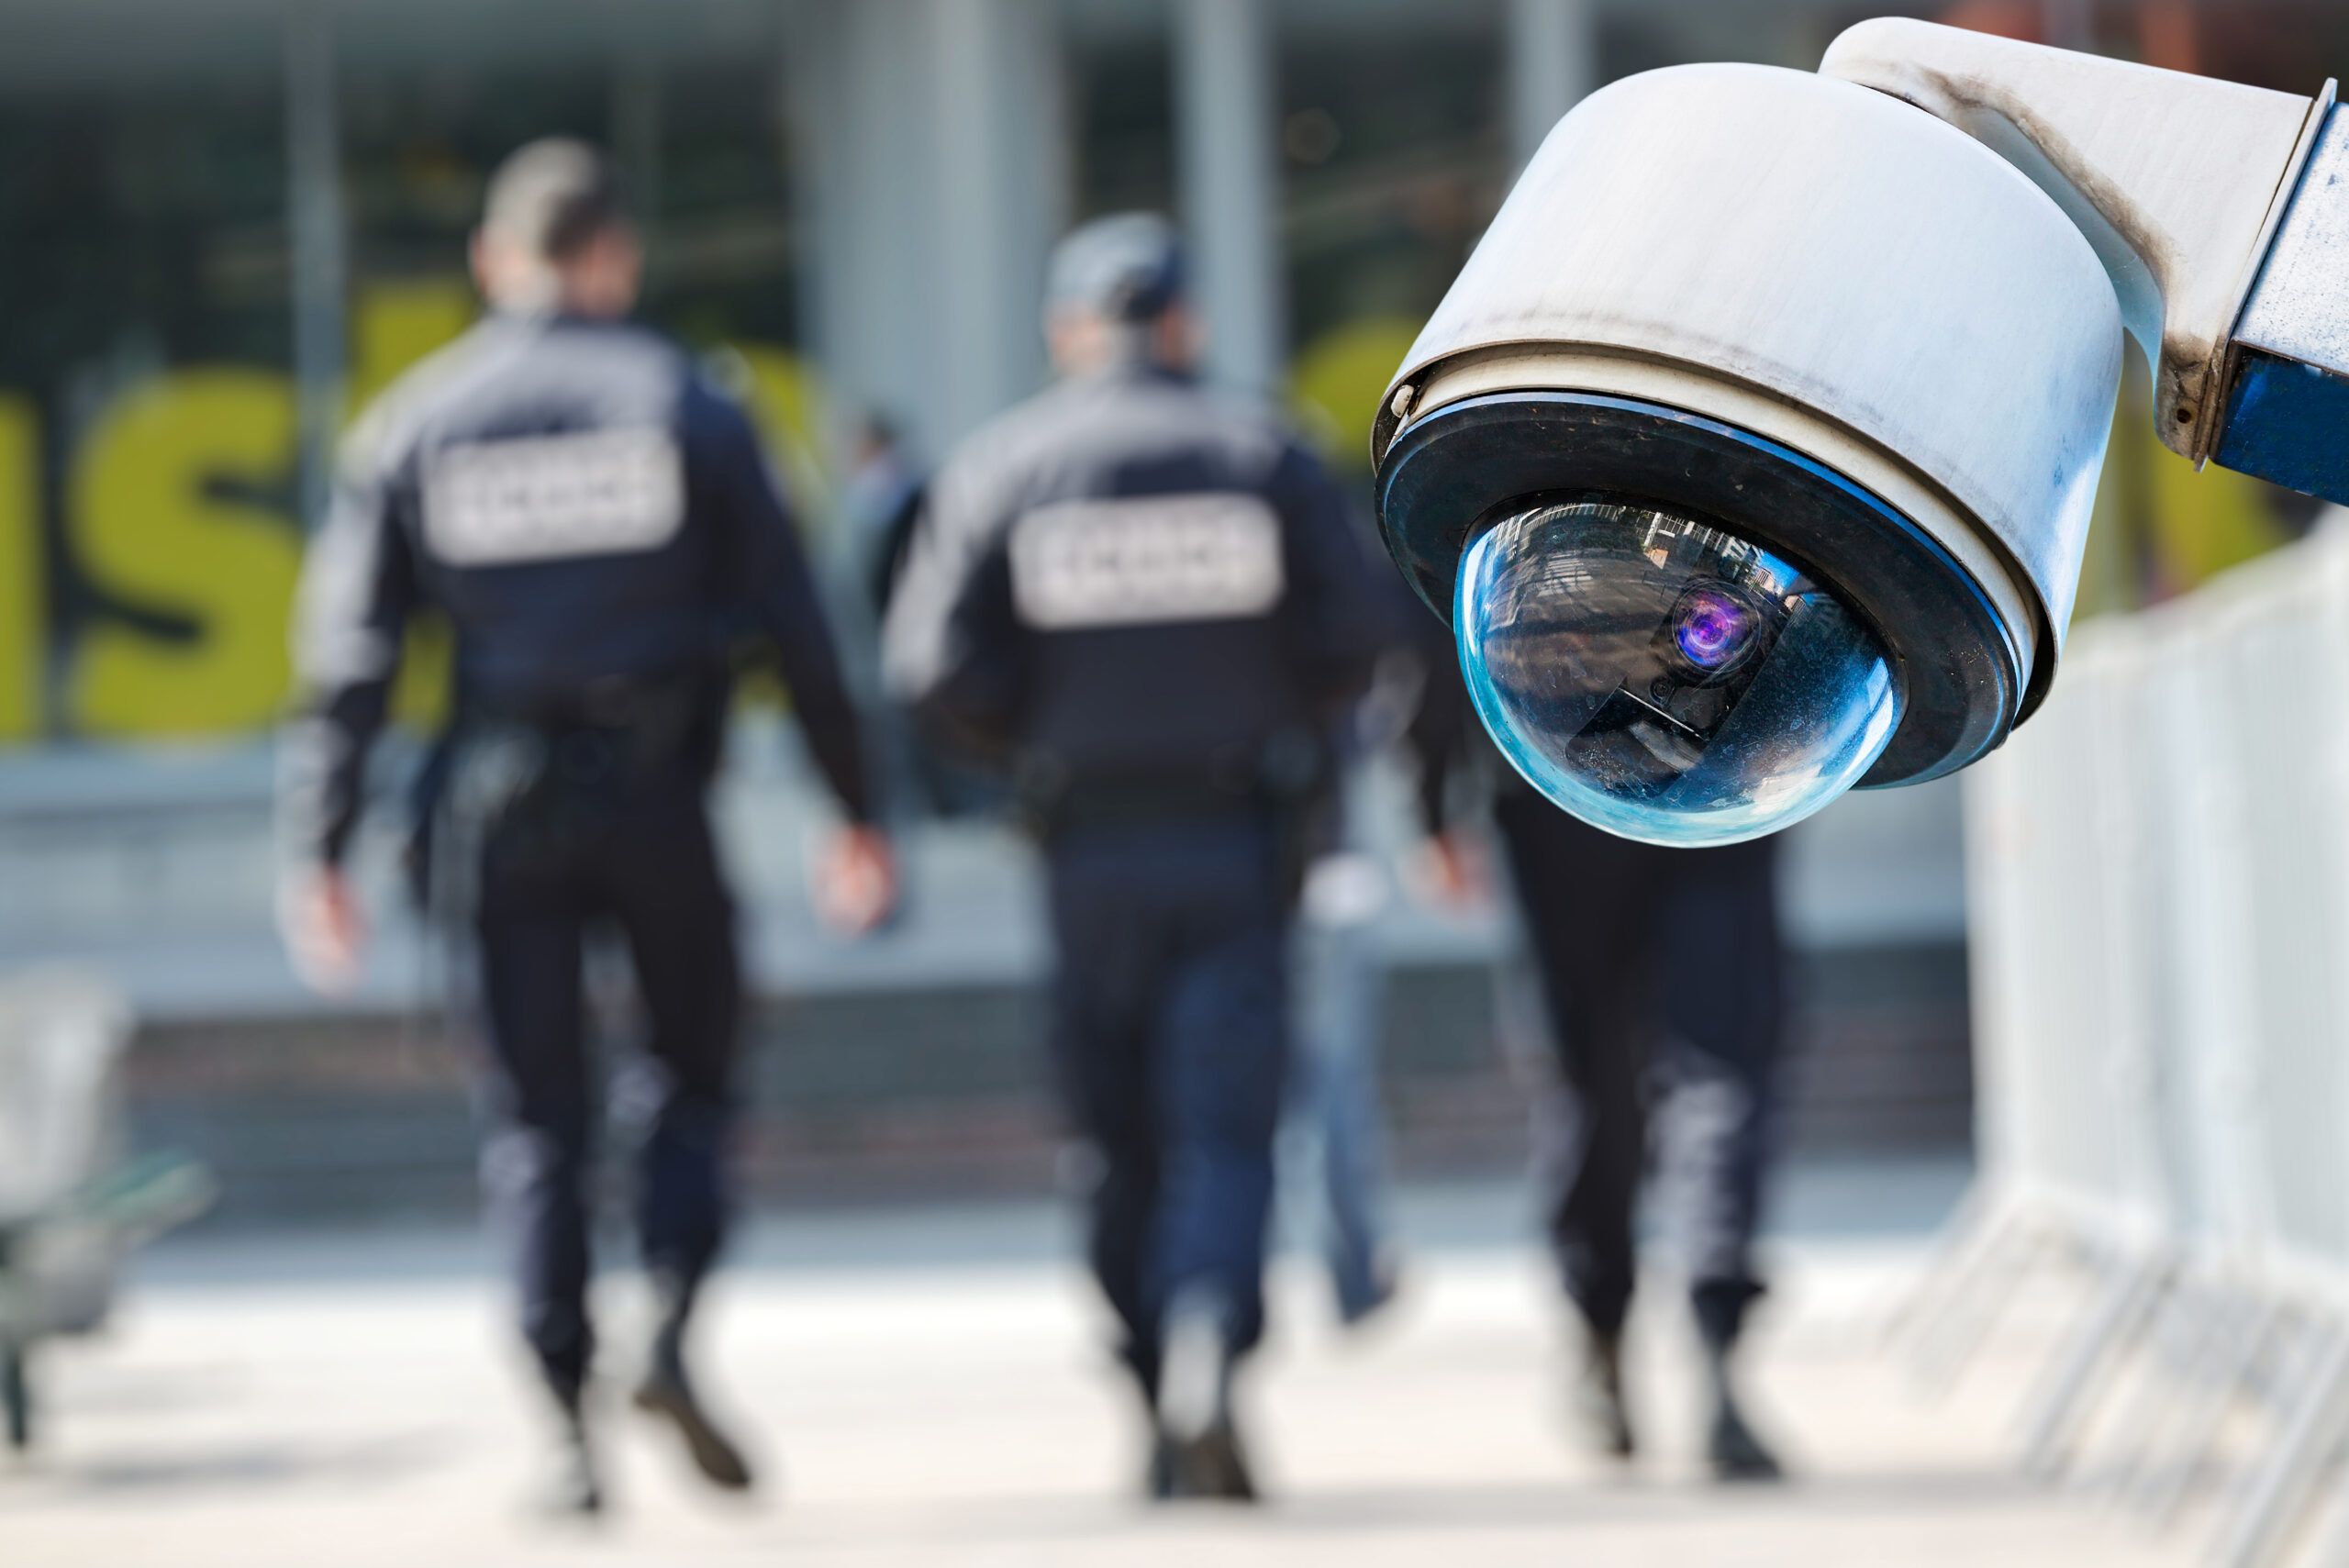 Three security officers patrol in the blurred background. In the foreground, a fisheye lens CCTV unit watches the camer.